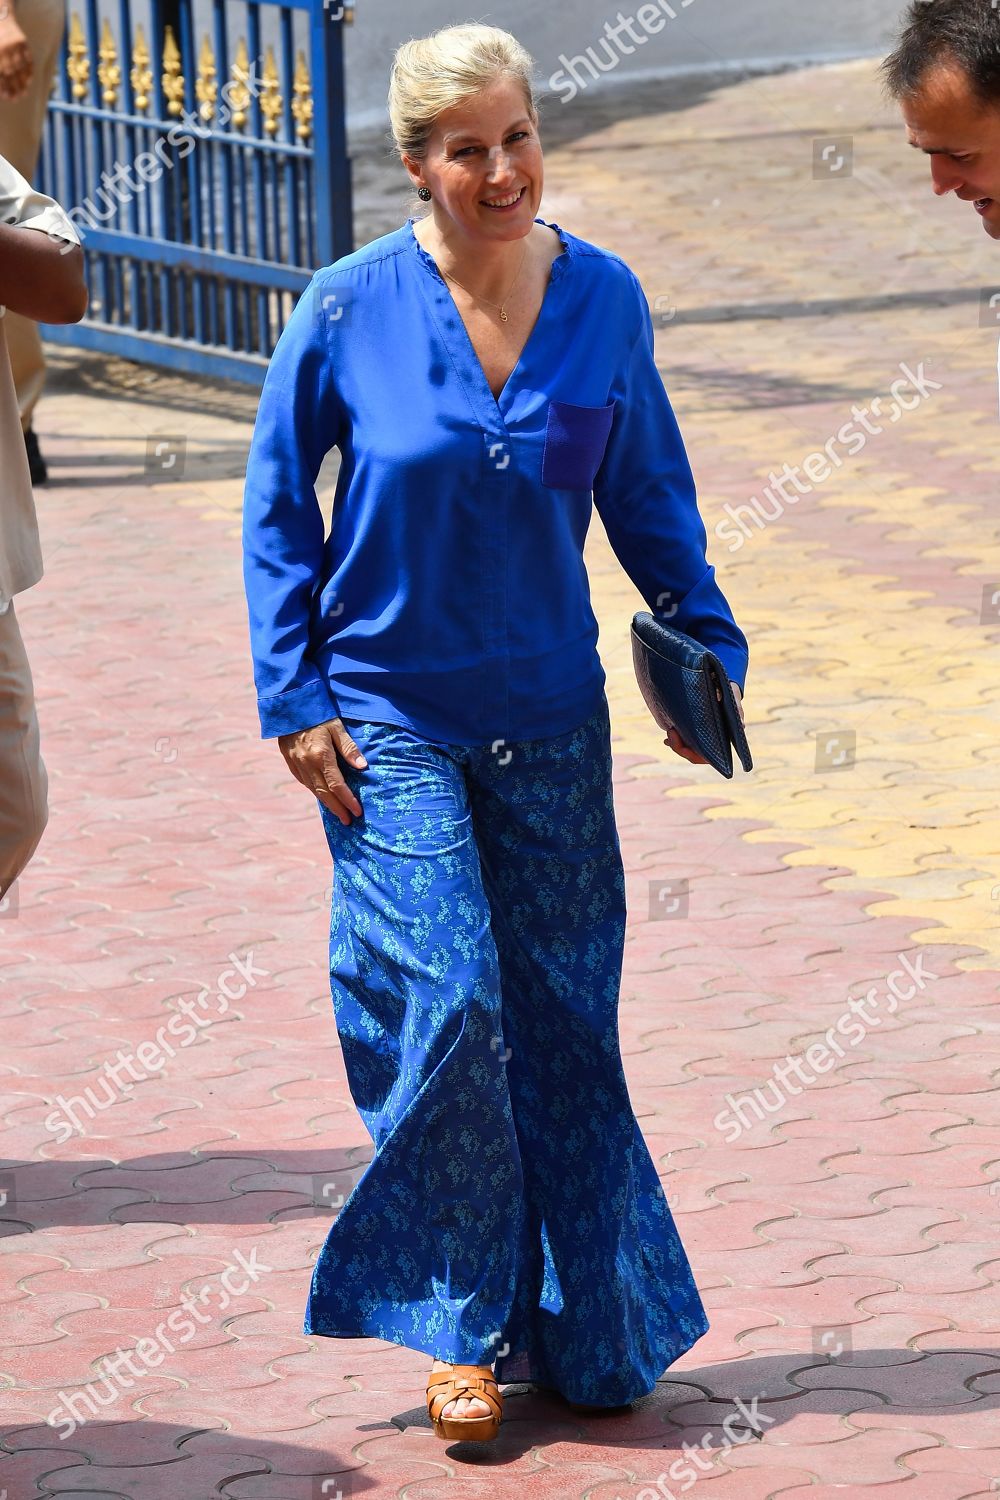 sophie-countess-of-wessex-visit-to-india-shutterstock-editorial-10222586d.jpg